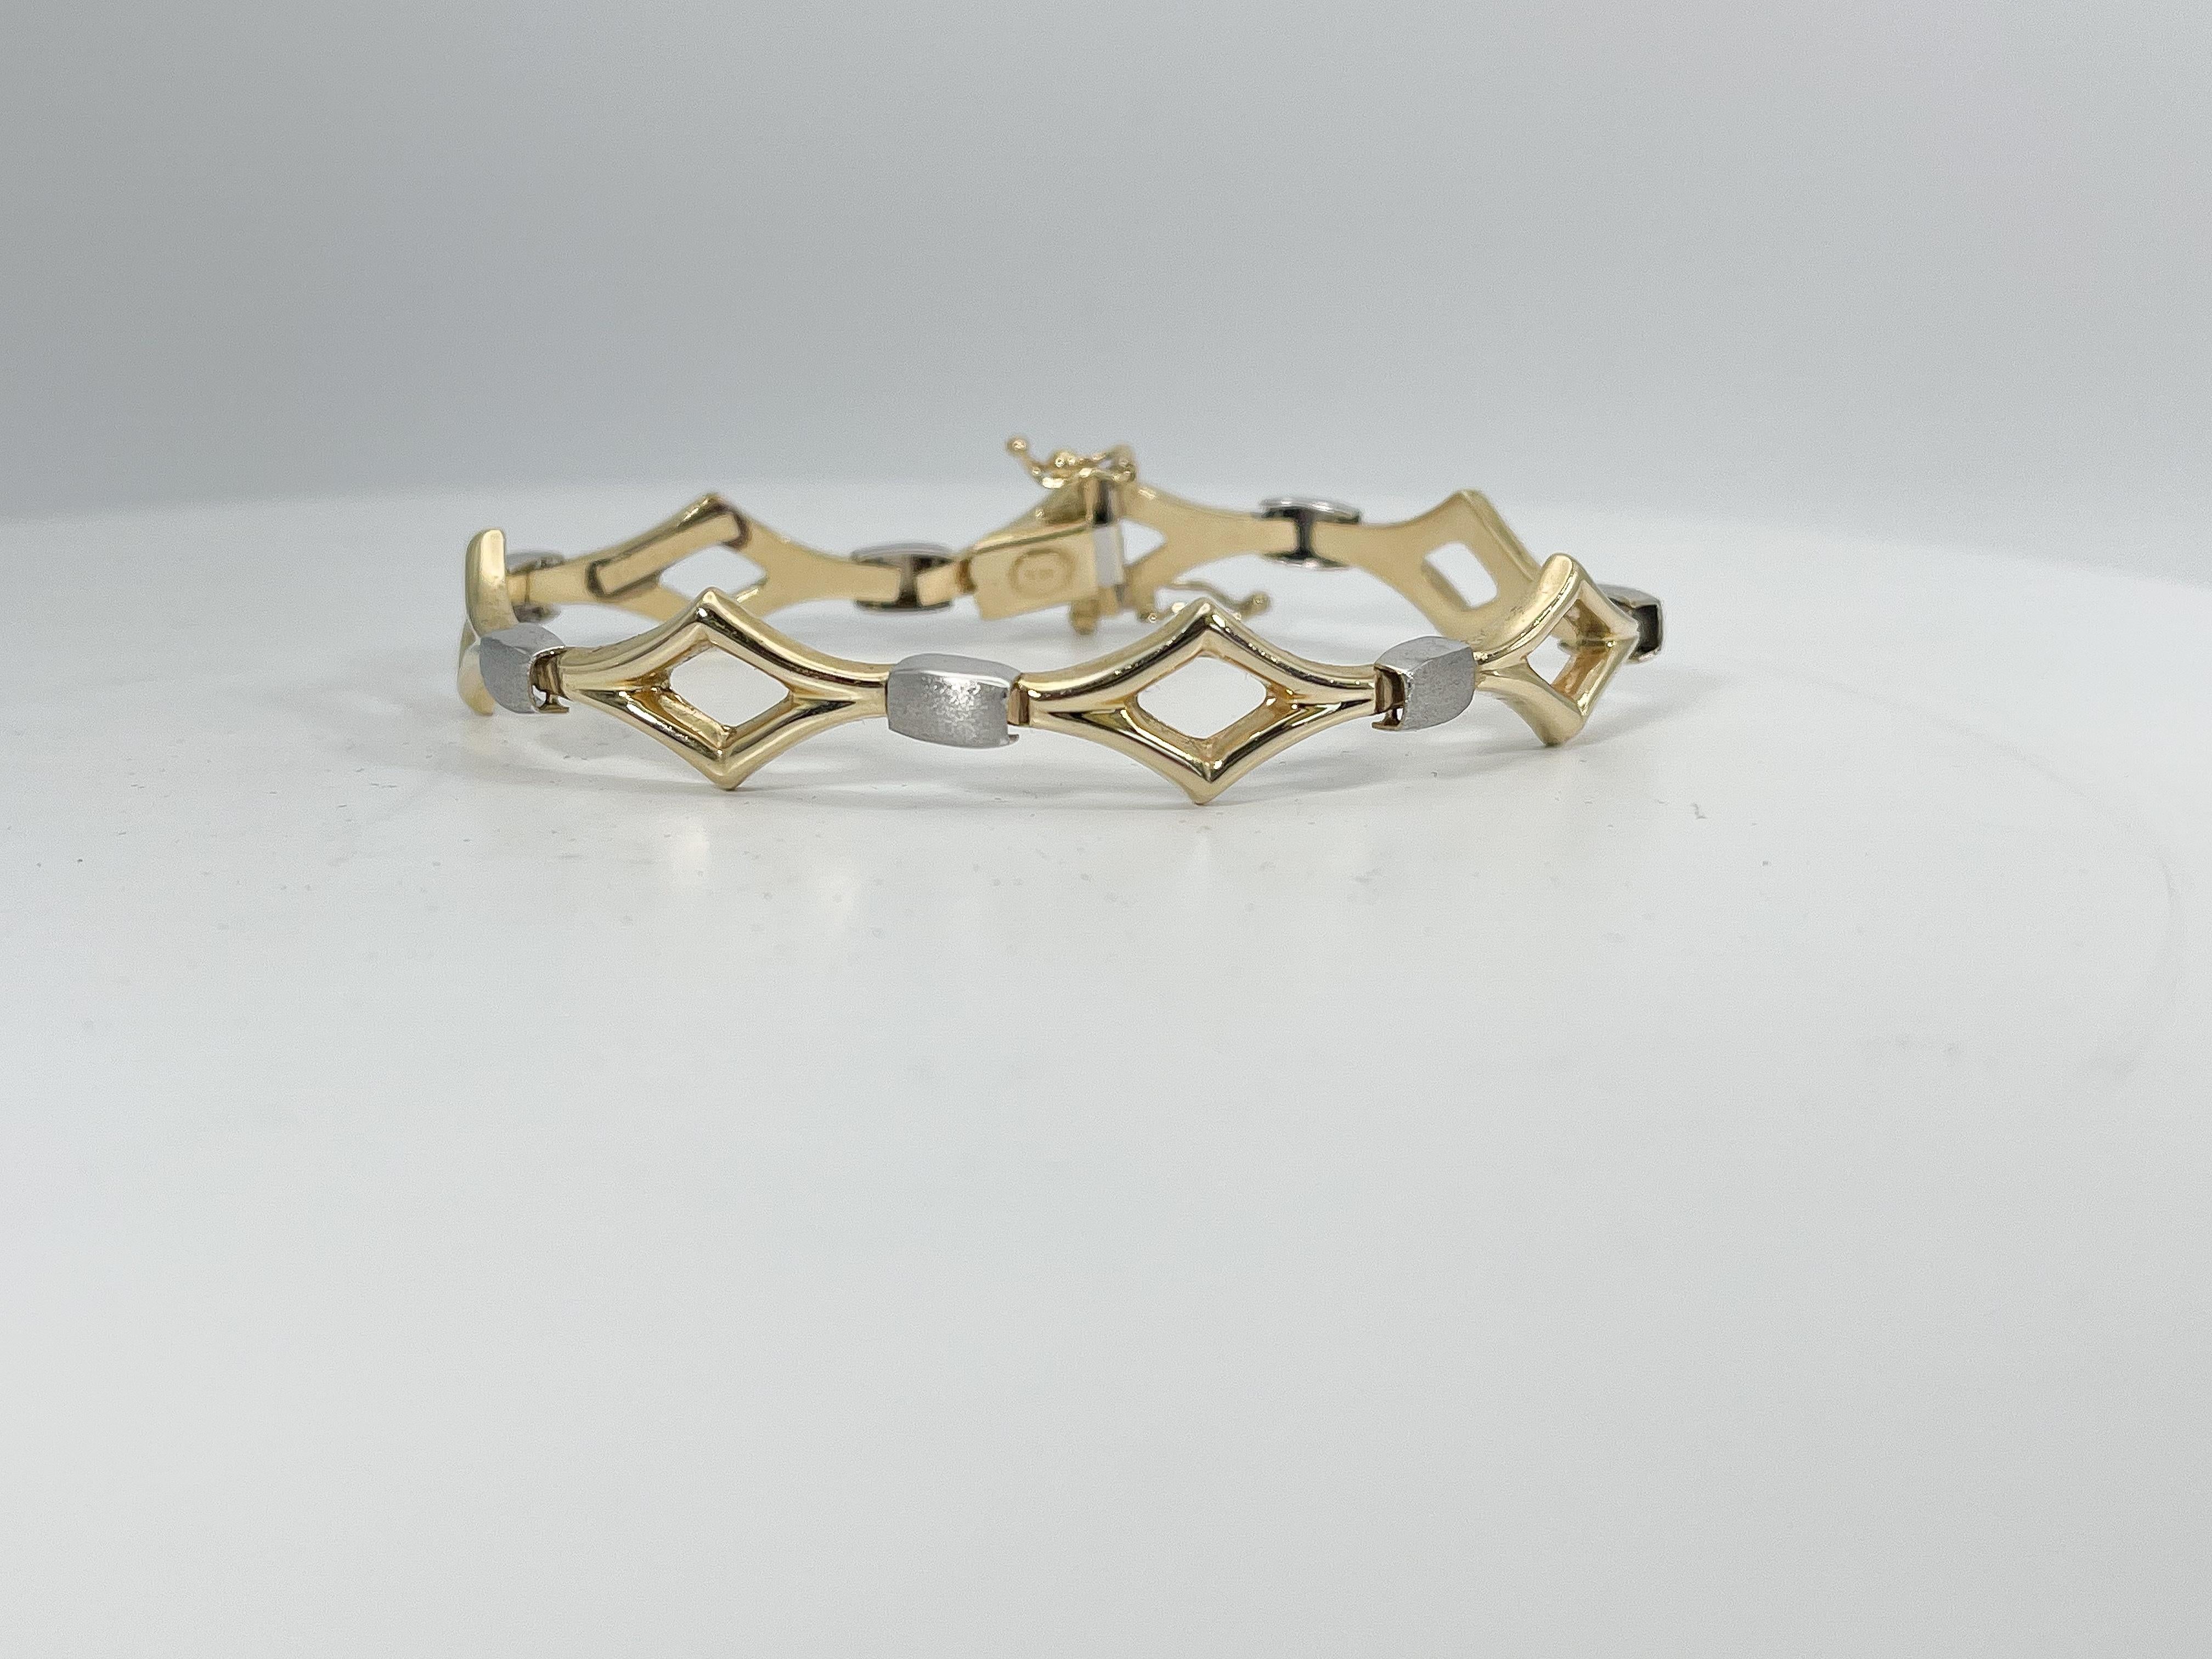 14k two toned fancy triangle bracelet. This bracelet comes with a figure 8 clasp to open and close, the width is 11.3 mm, the length is 7.5 inches, and it has a total weight of 12.78 grams.